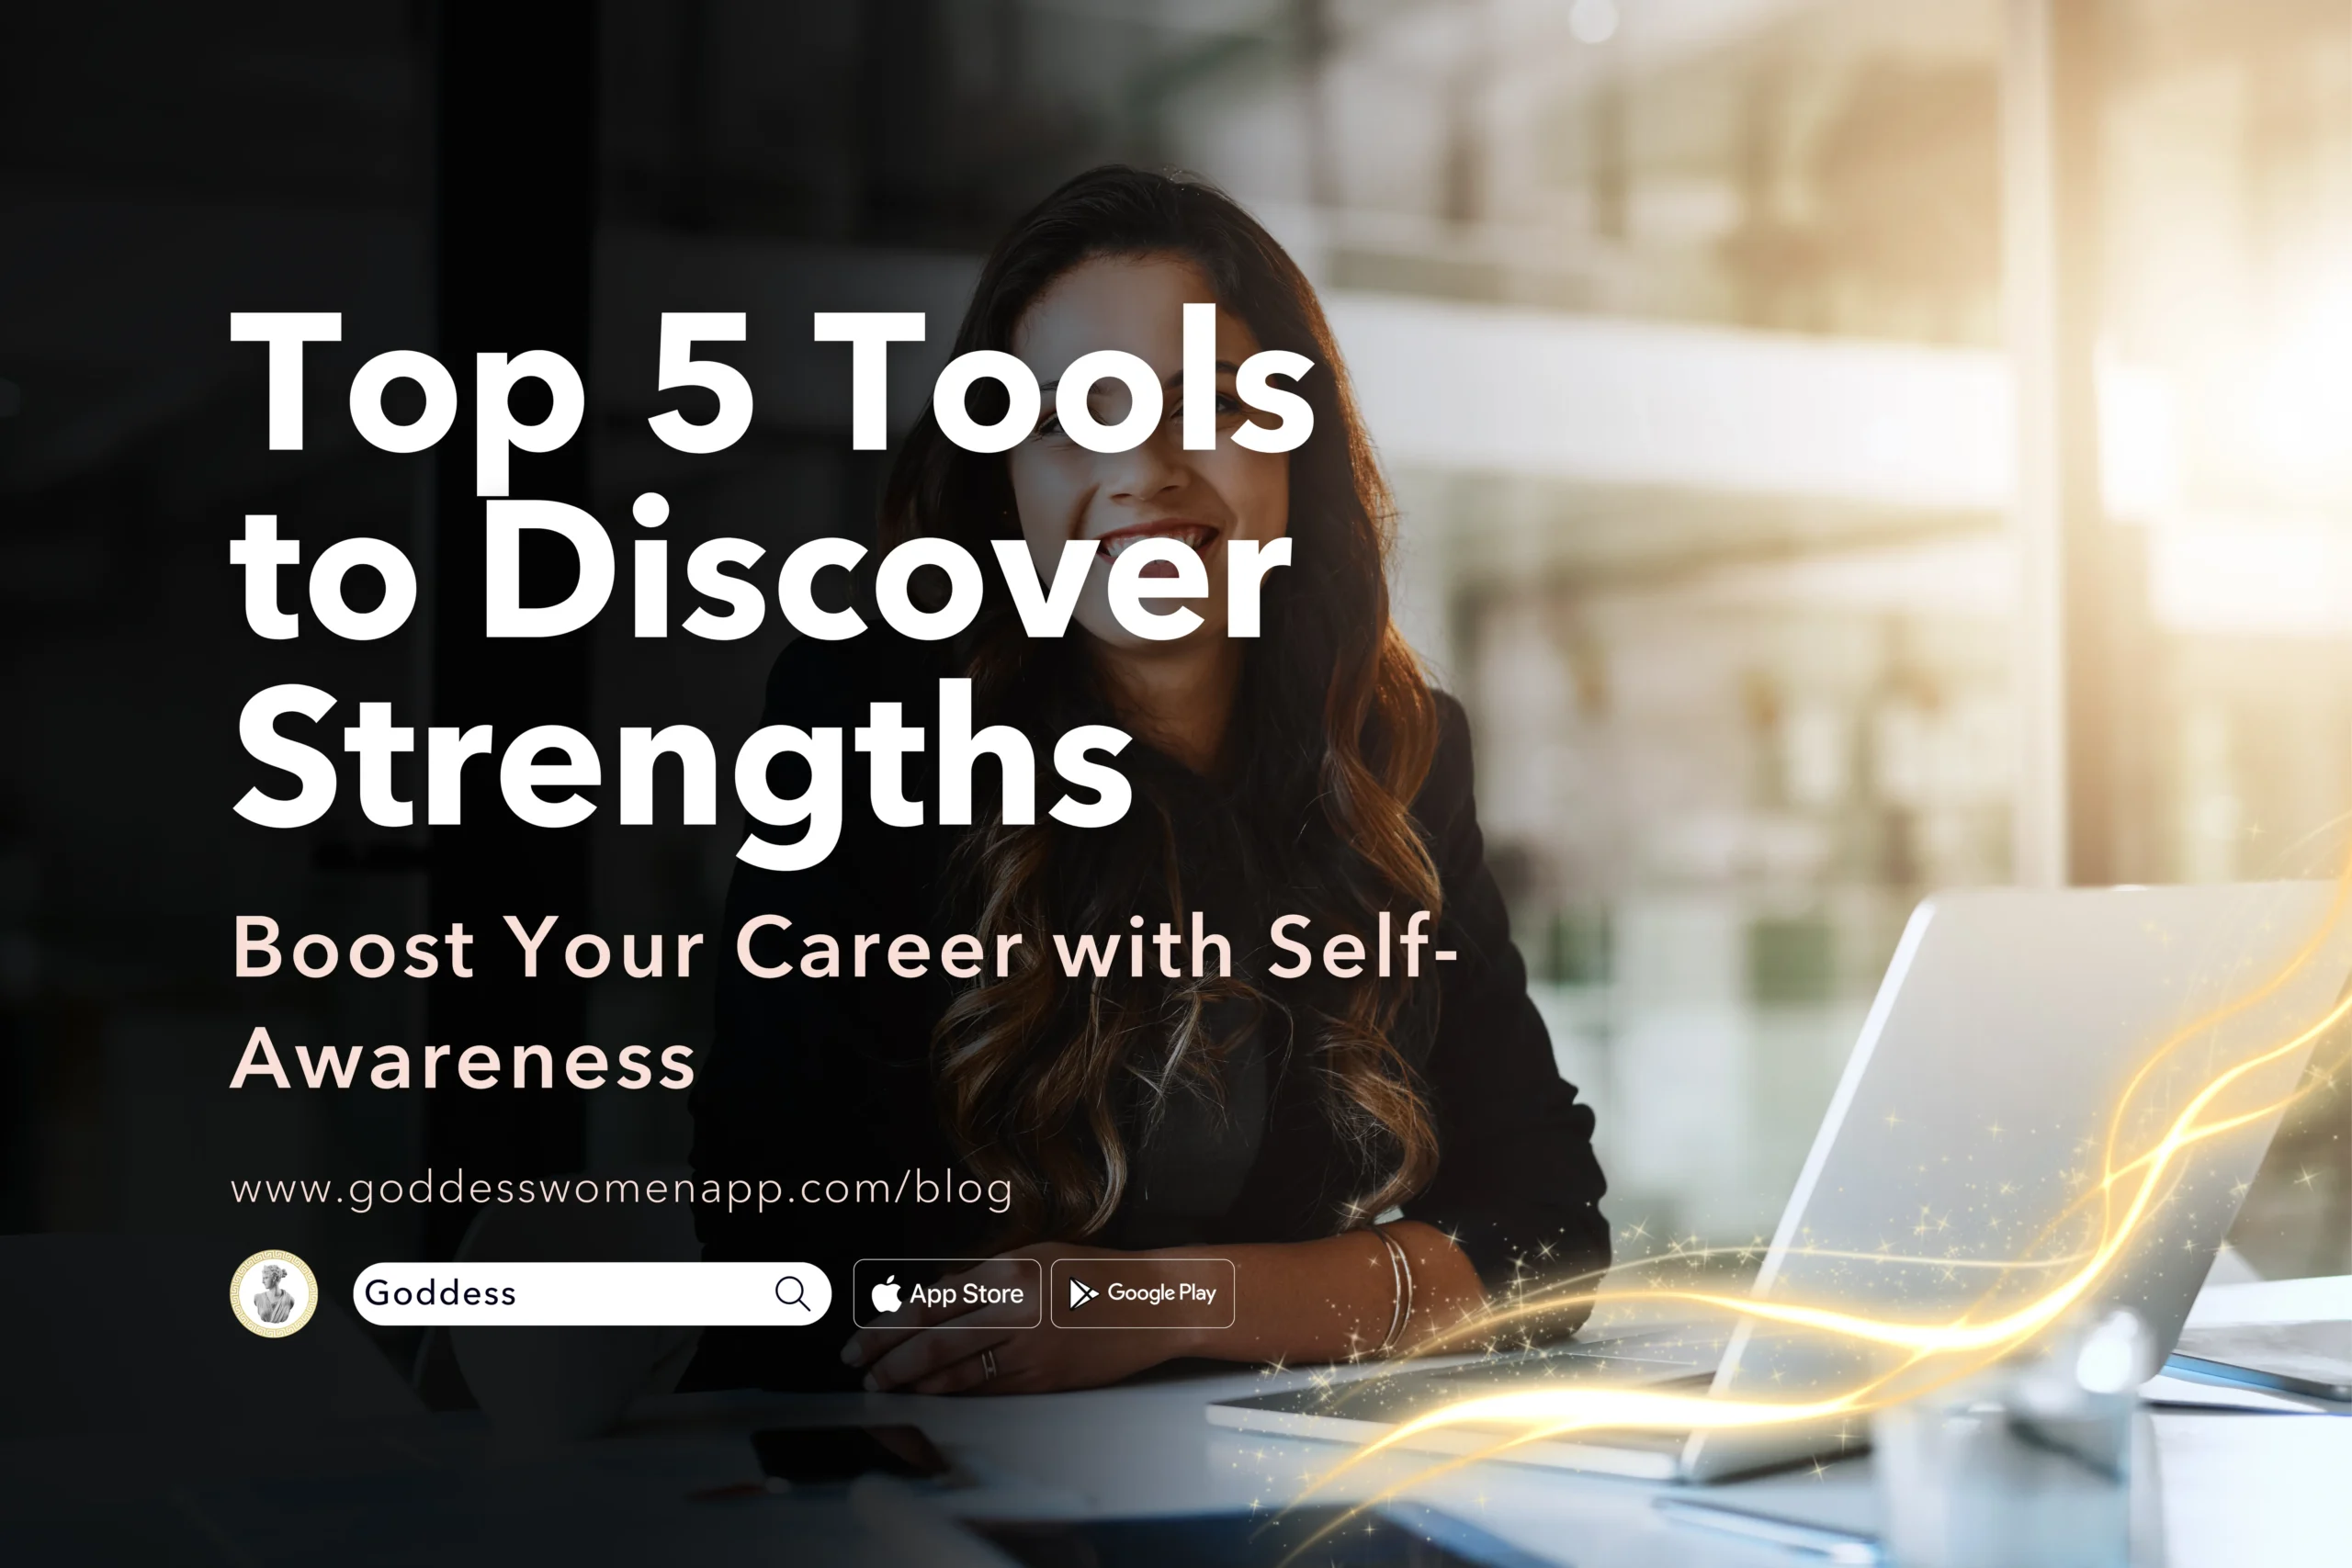 Top 5 Tools to Discover Strengths and Boost Your Career